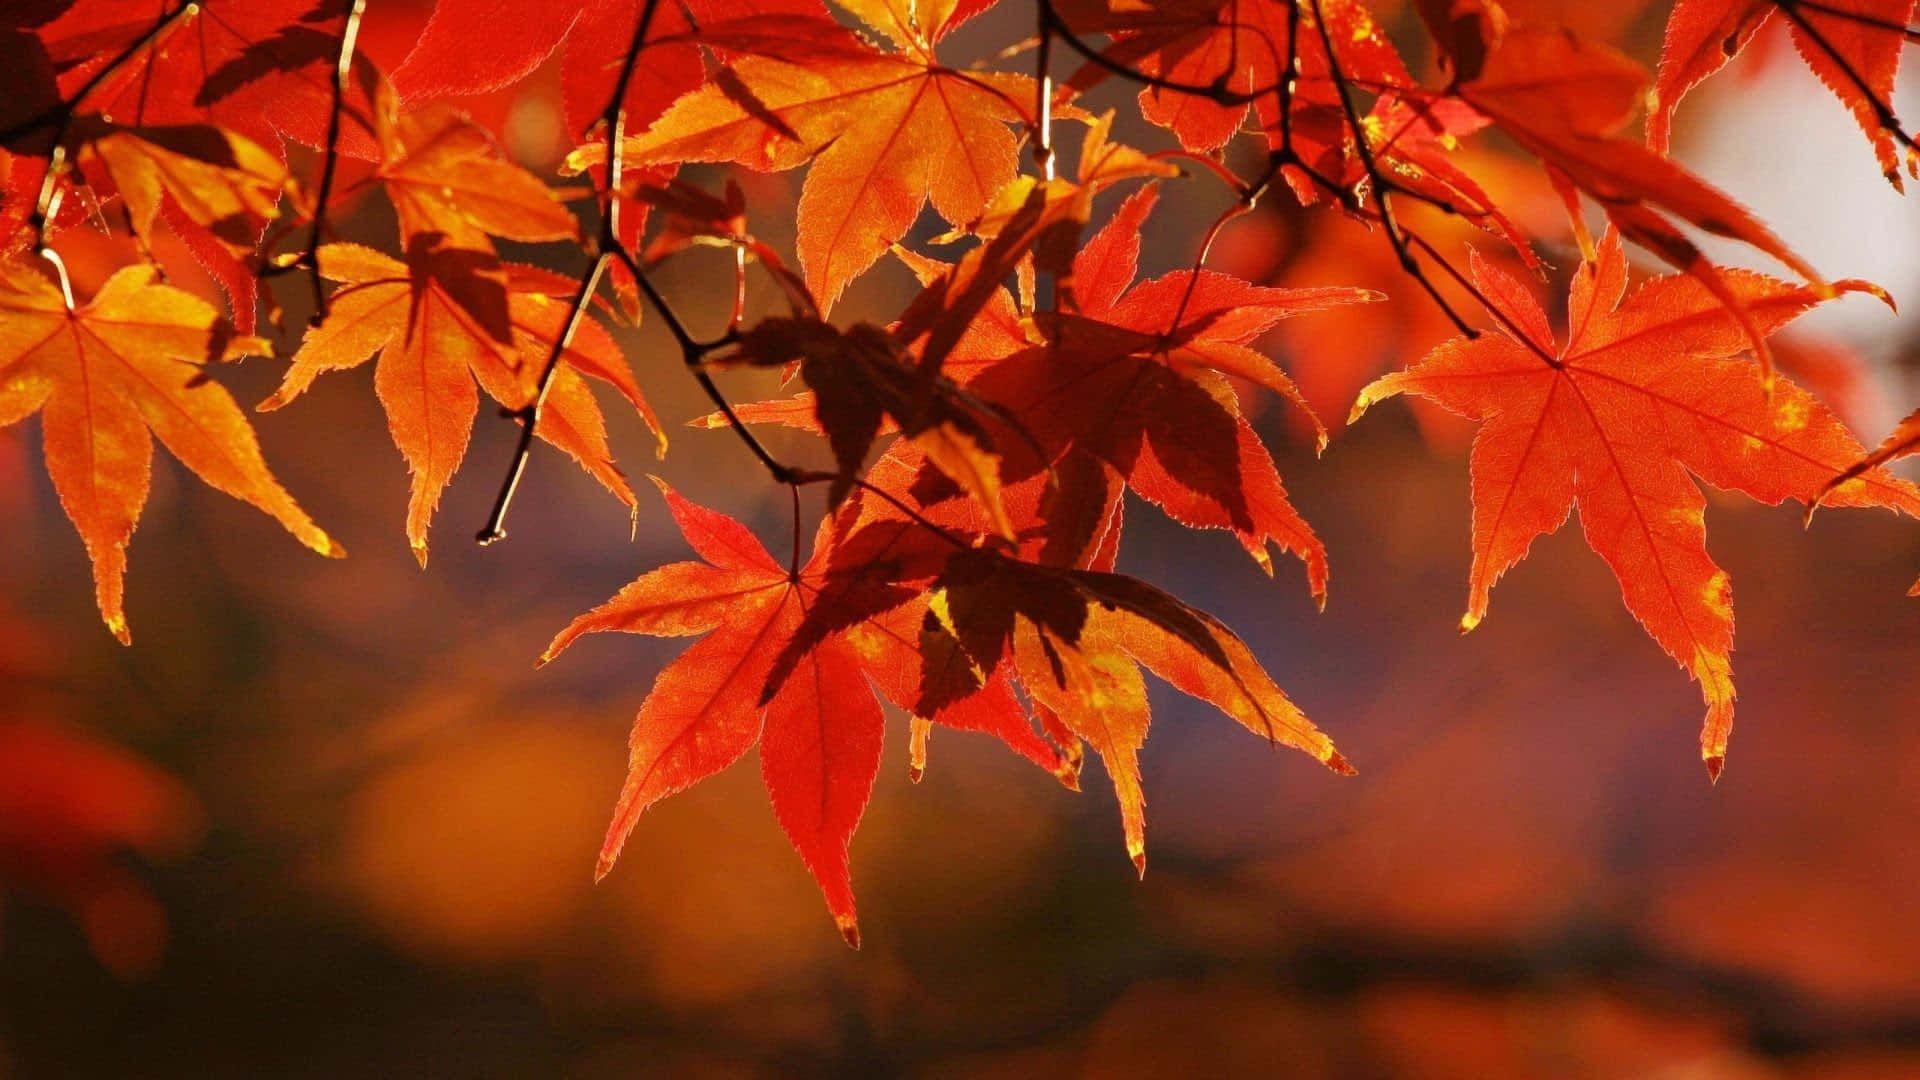 Download High Resolution Fall Leaves In Bokeh Effect Wallpaper ...